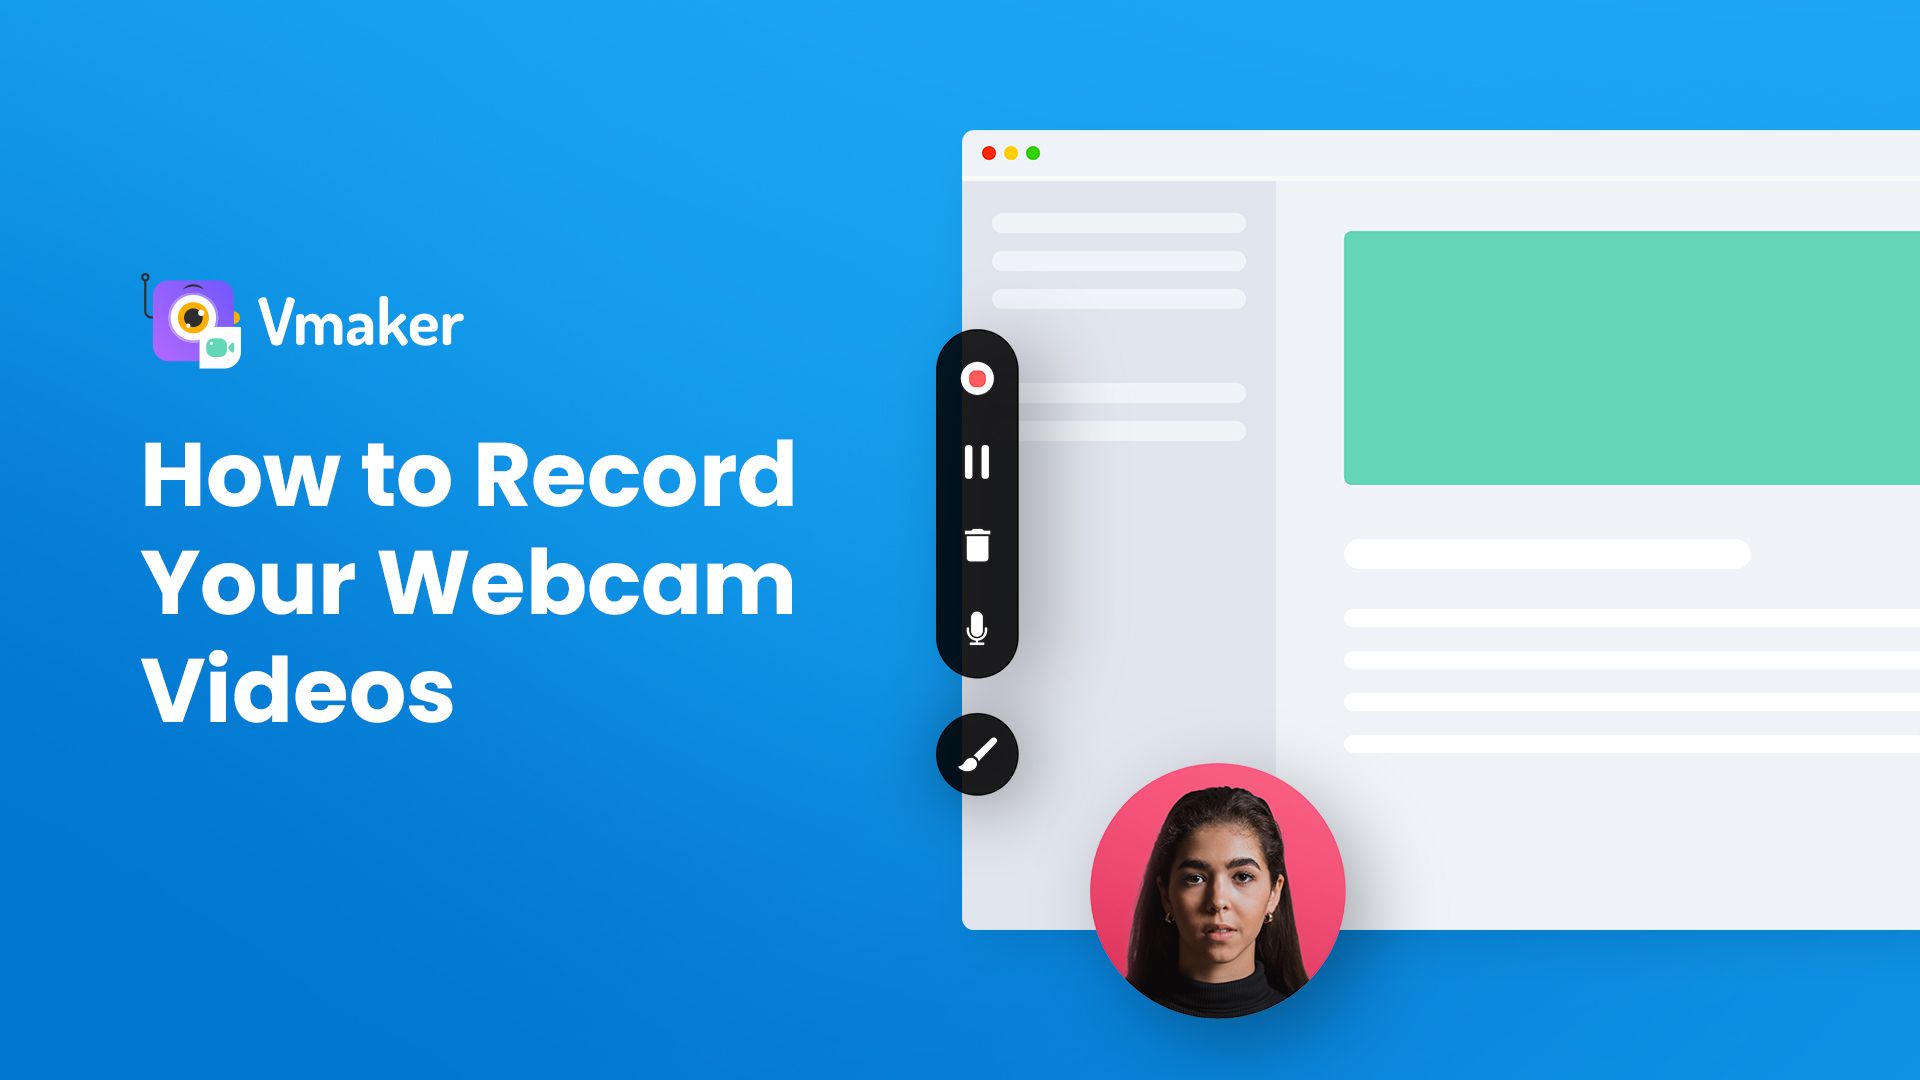 How do I record my webcam videos with Vmaker?